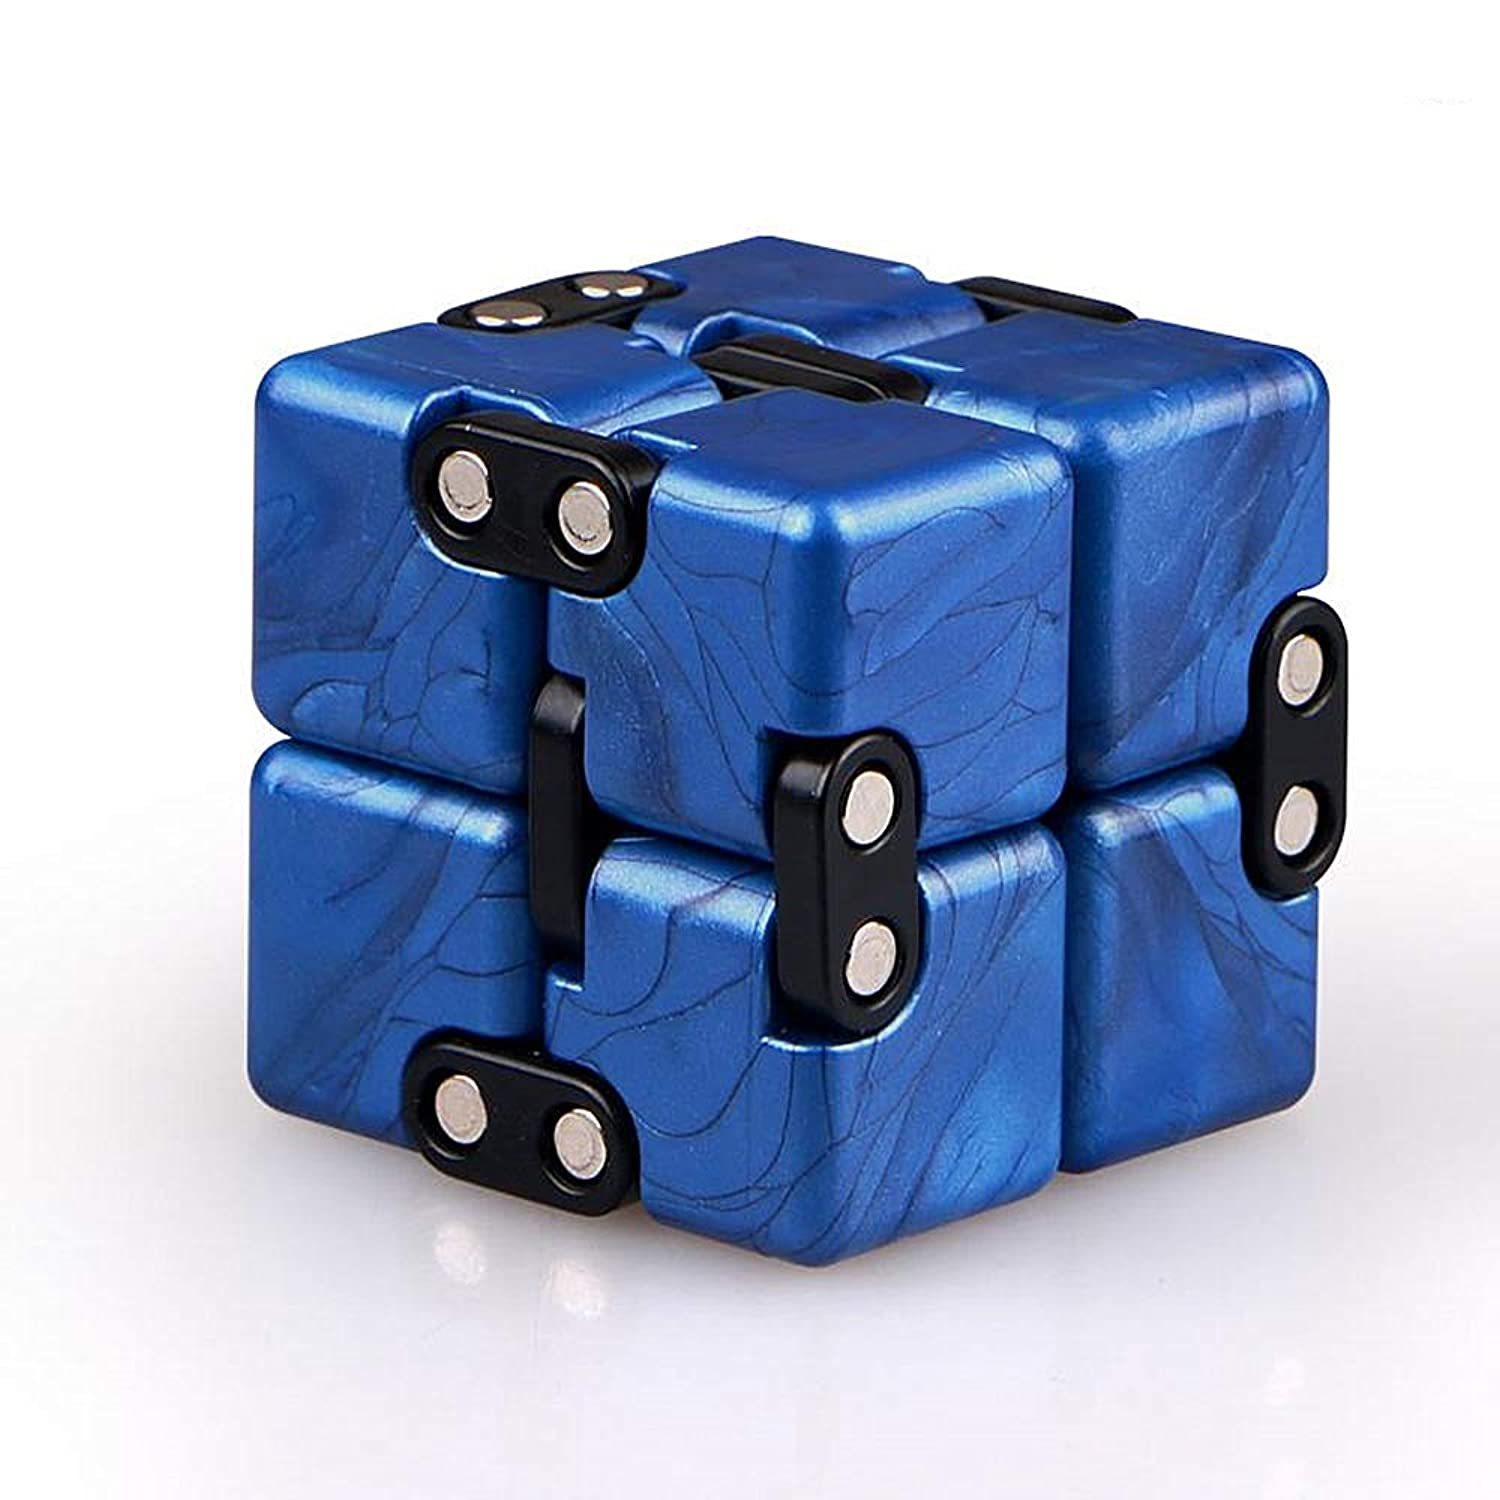 Qiyi Infinity Cube Fidget Toy Best For Stress And Anxiety Relief Hand